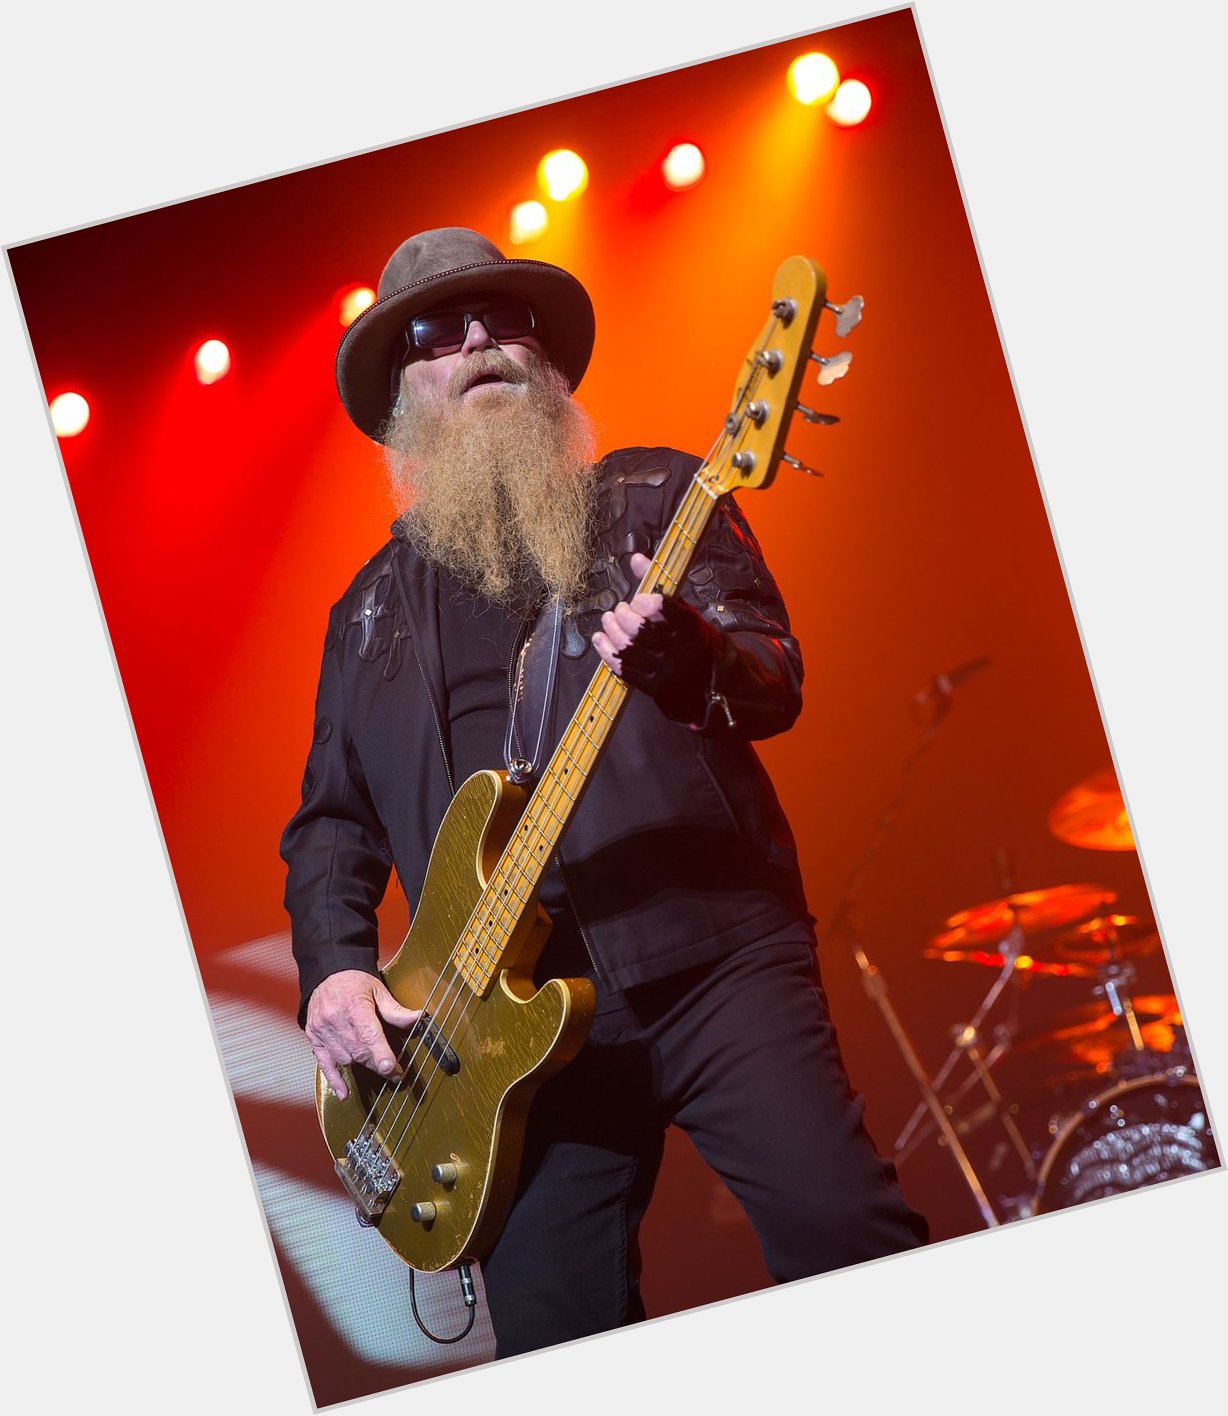 Wishing a Very Happy Birthday to Dusty Hill of today! 